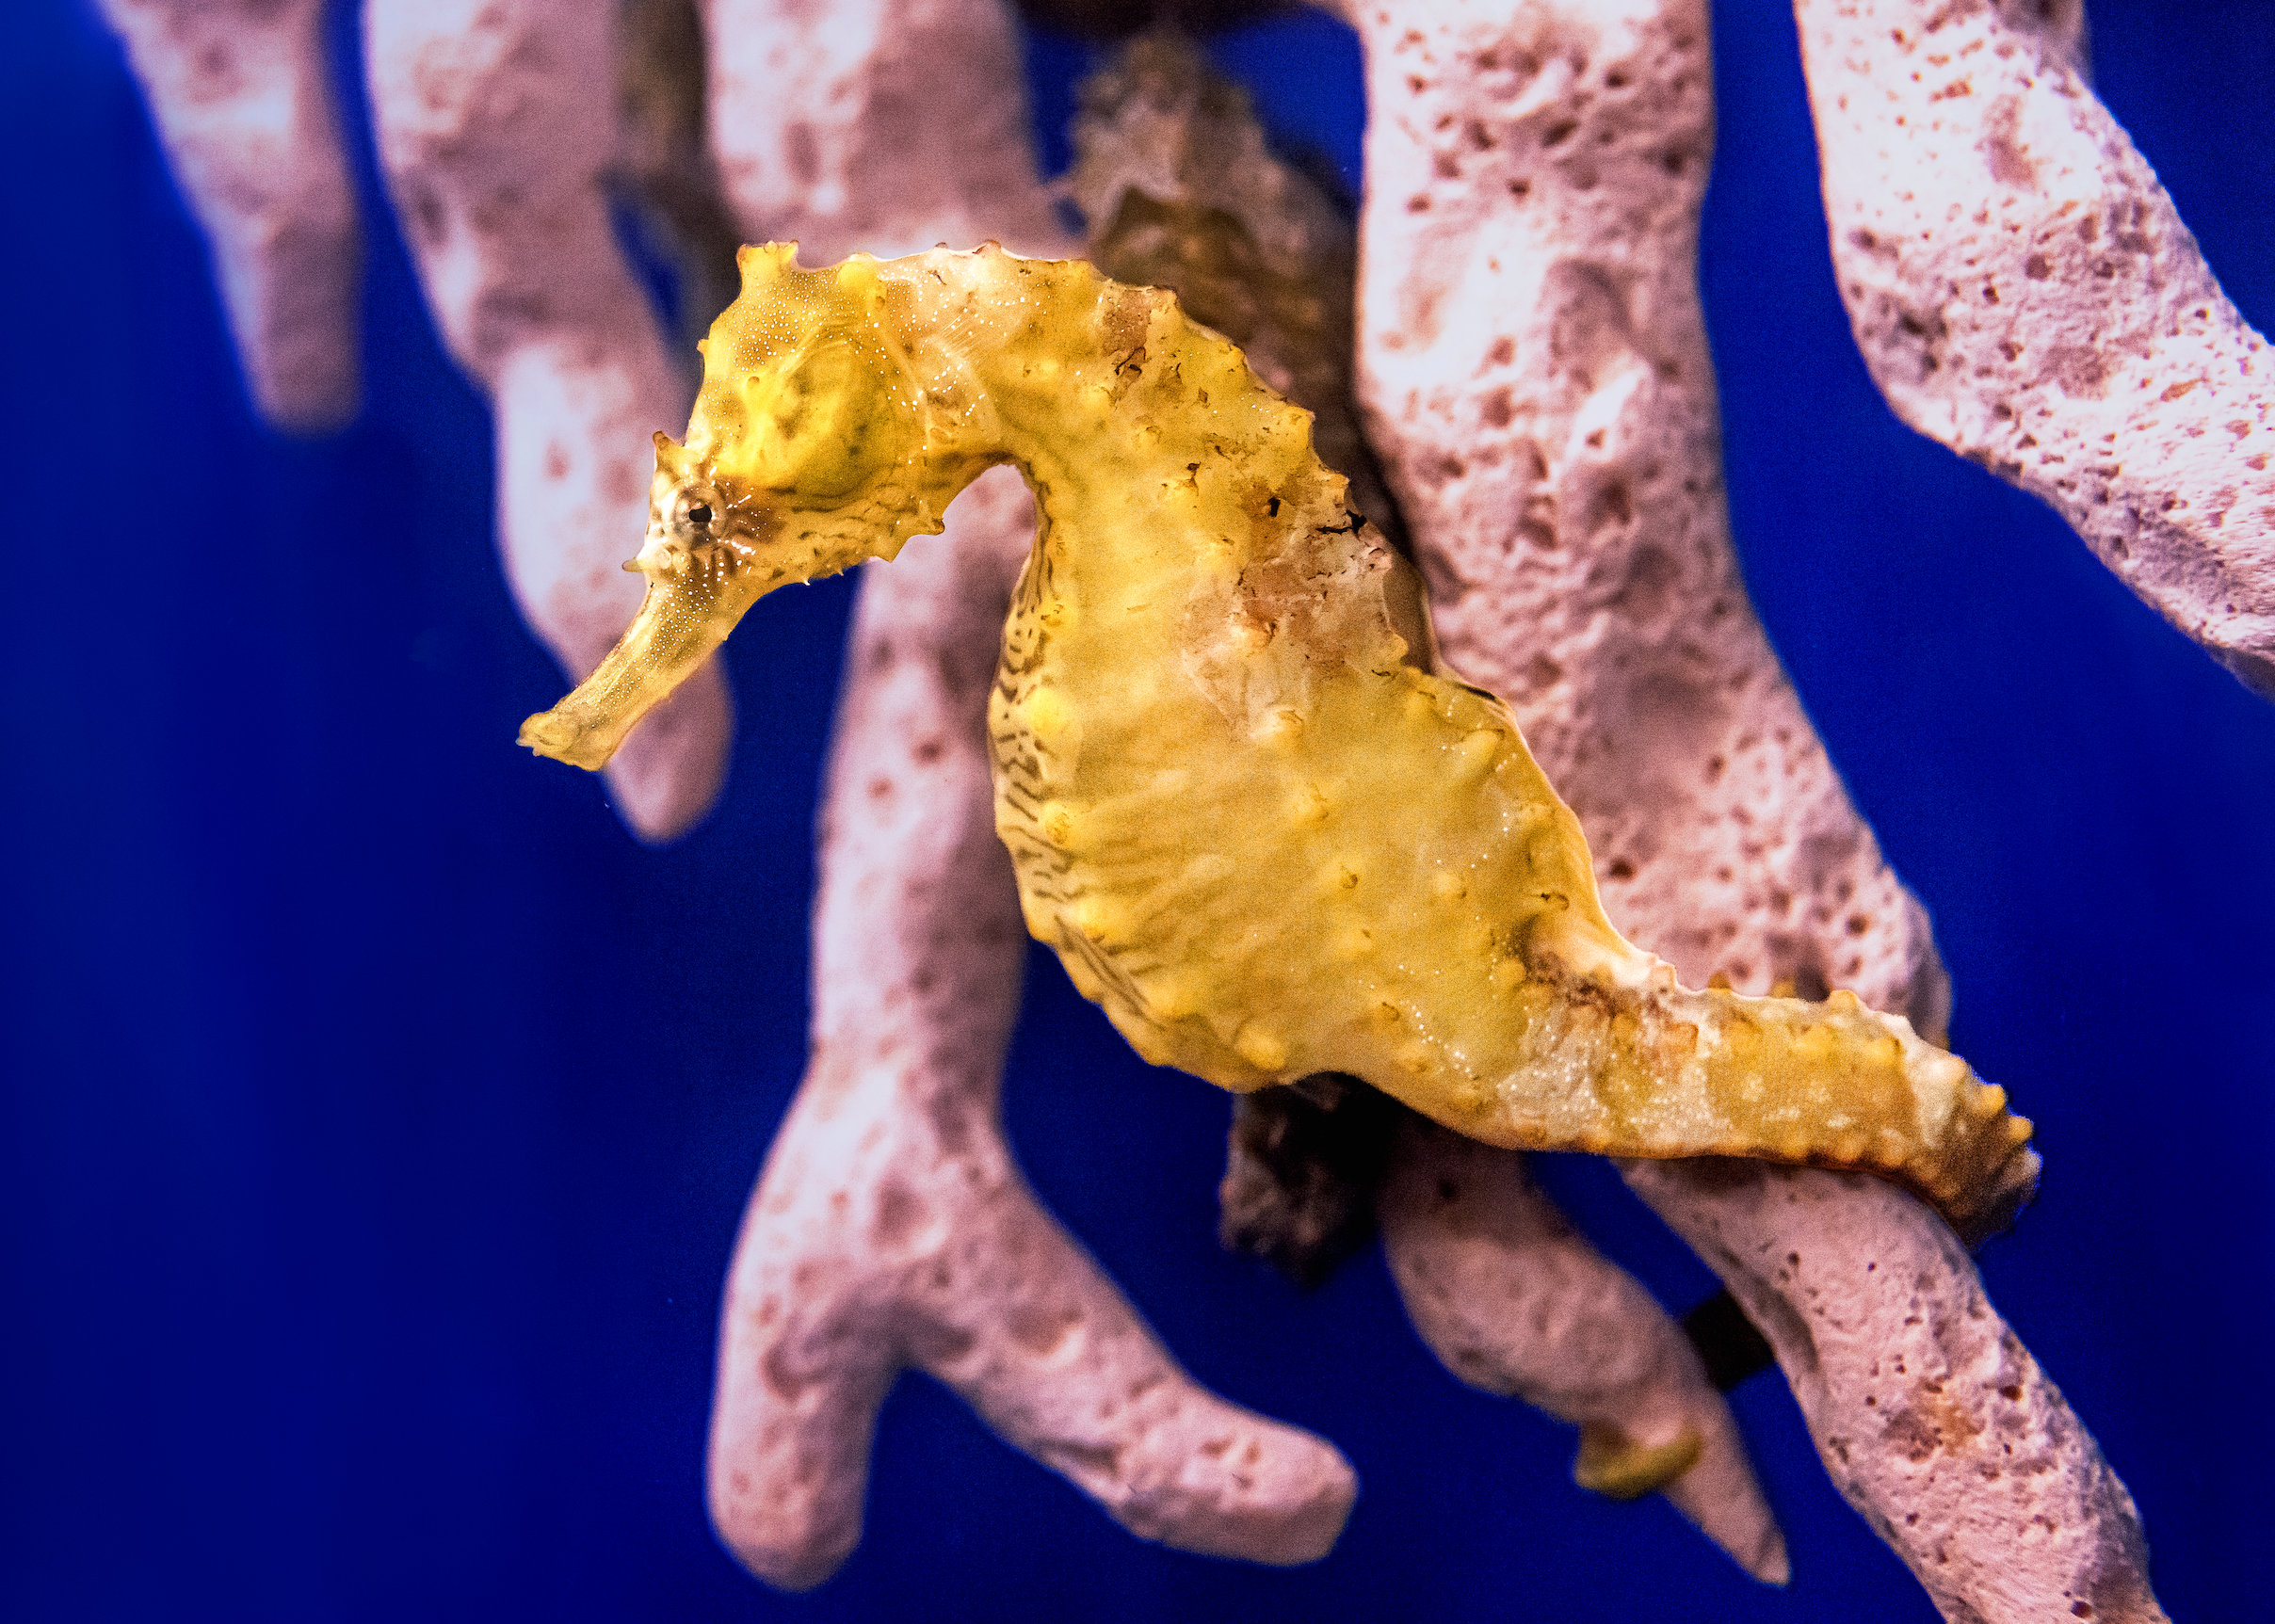 a yellow orange seahorse clings to a piece of light pink coral with its tail in front of a royal blue background